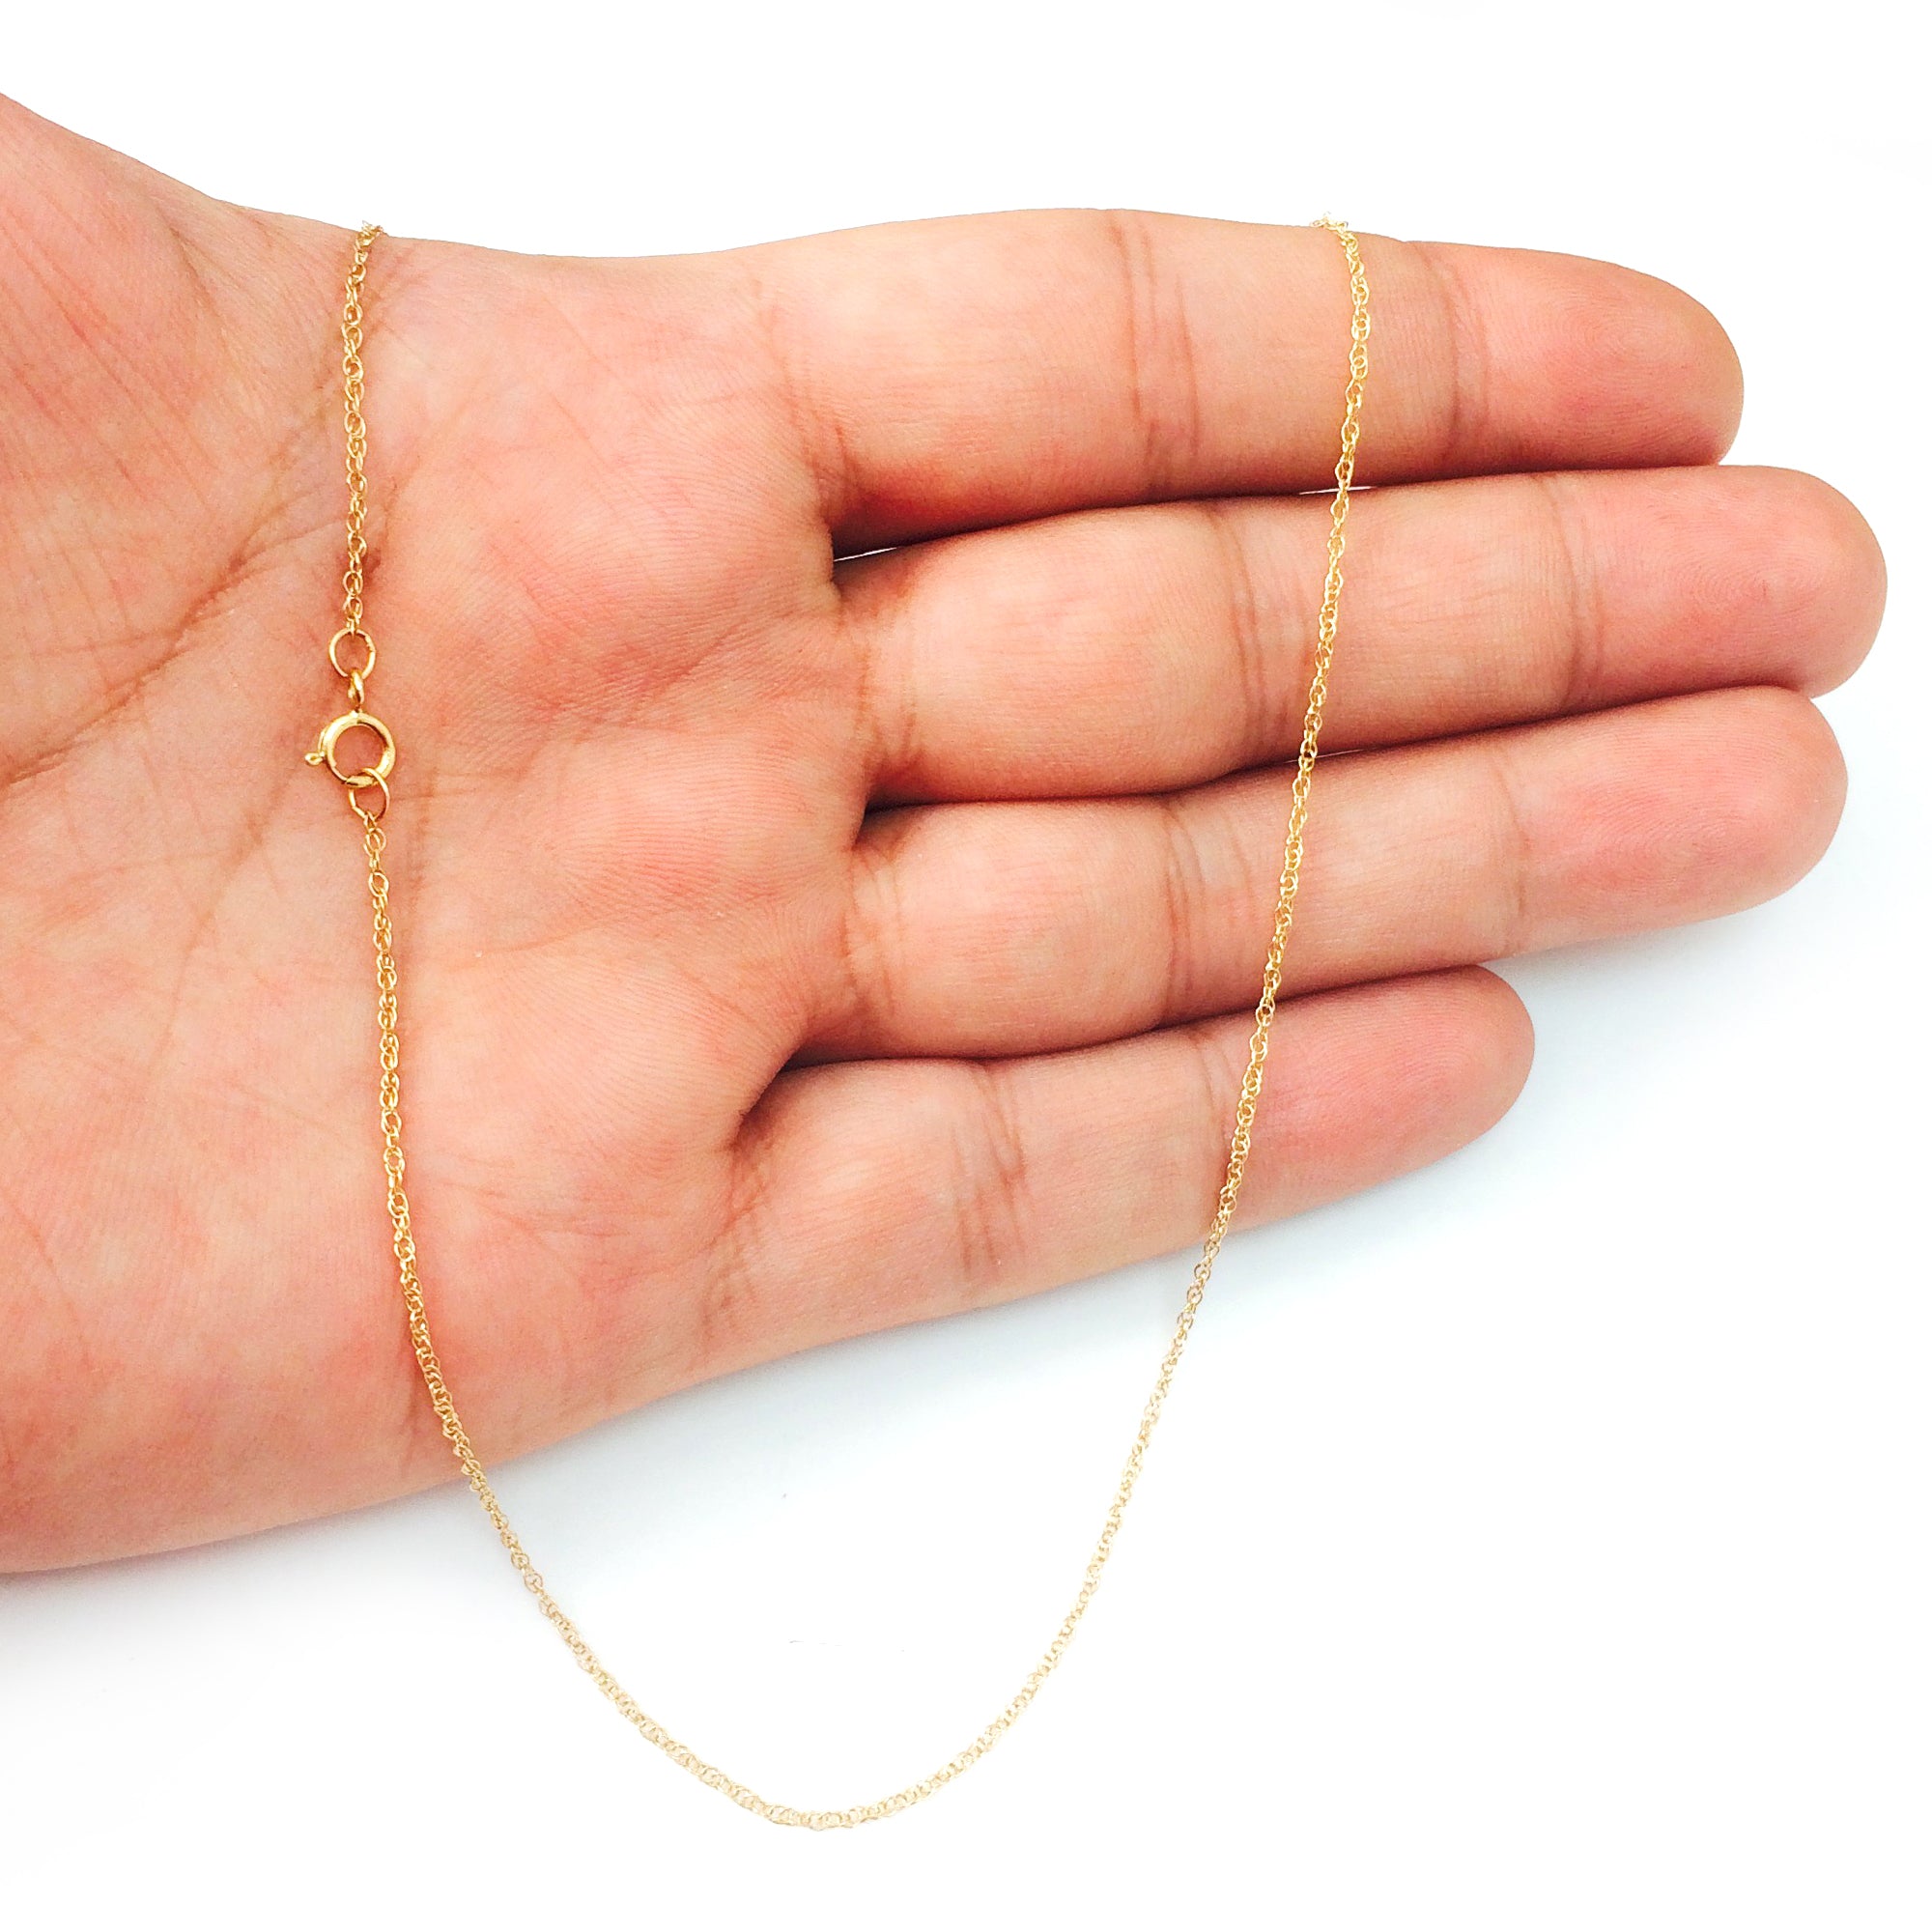 14k Yellow Gold Rope Chain Necklace, 0.7mm fine designer jewelry for men and women